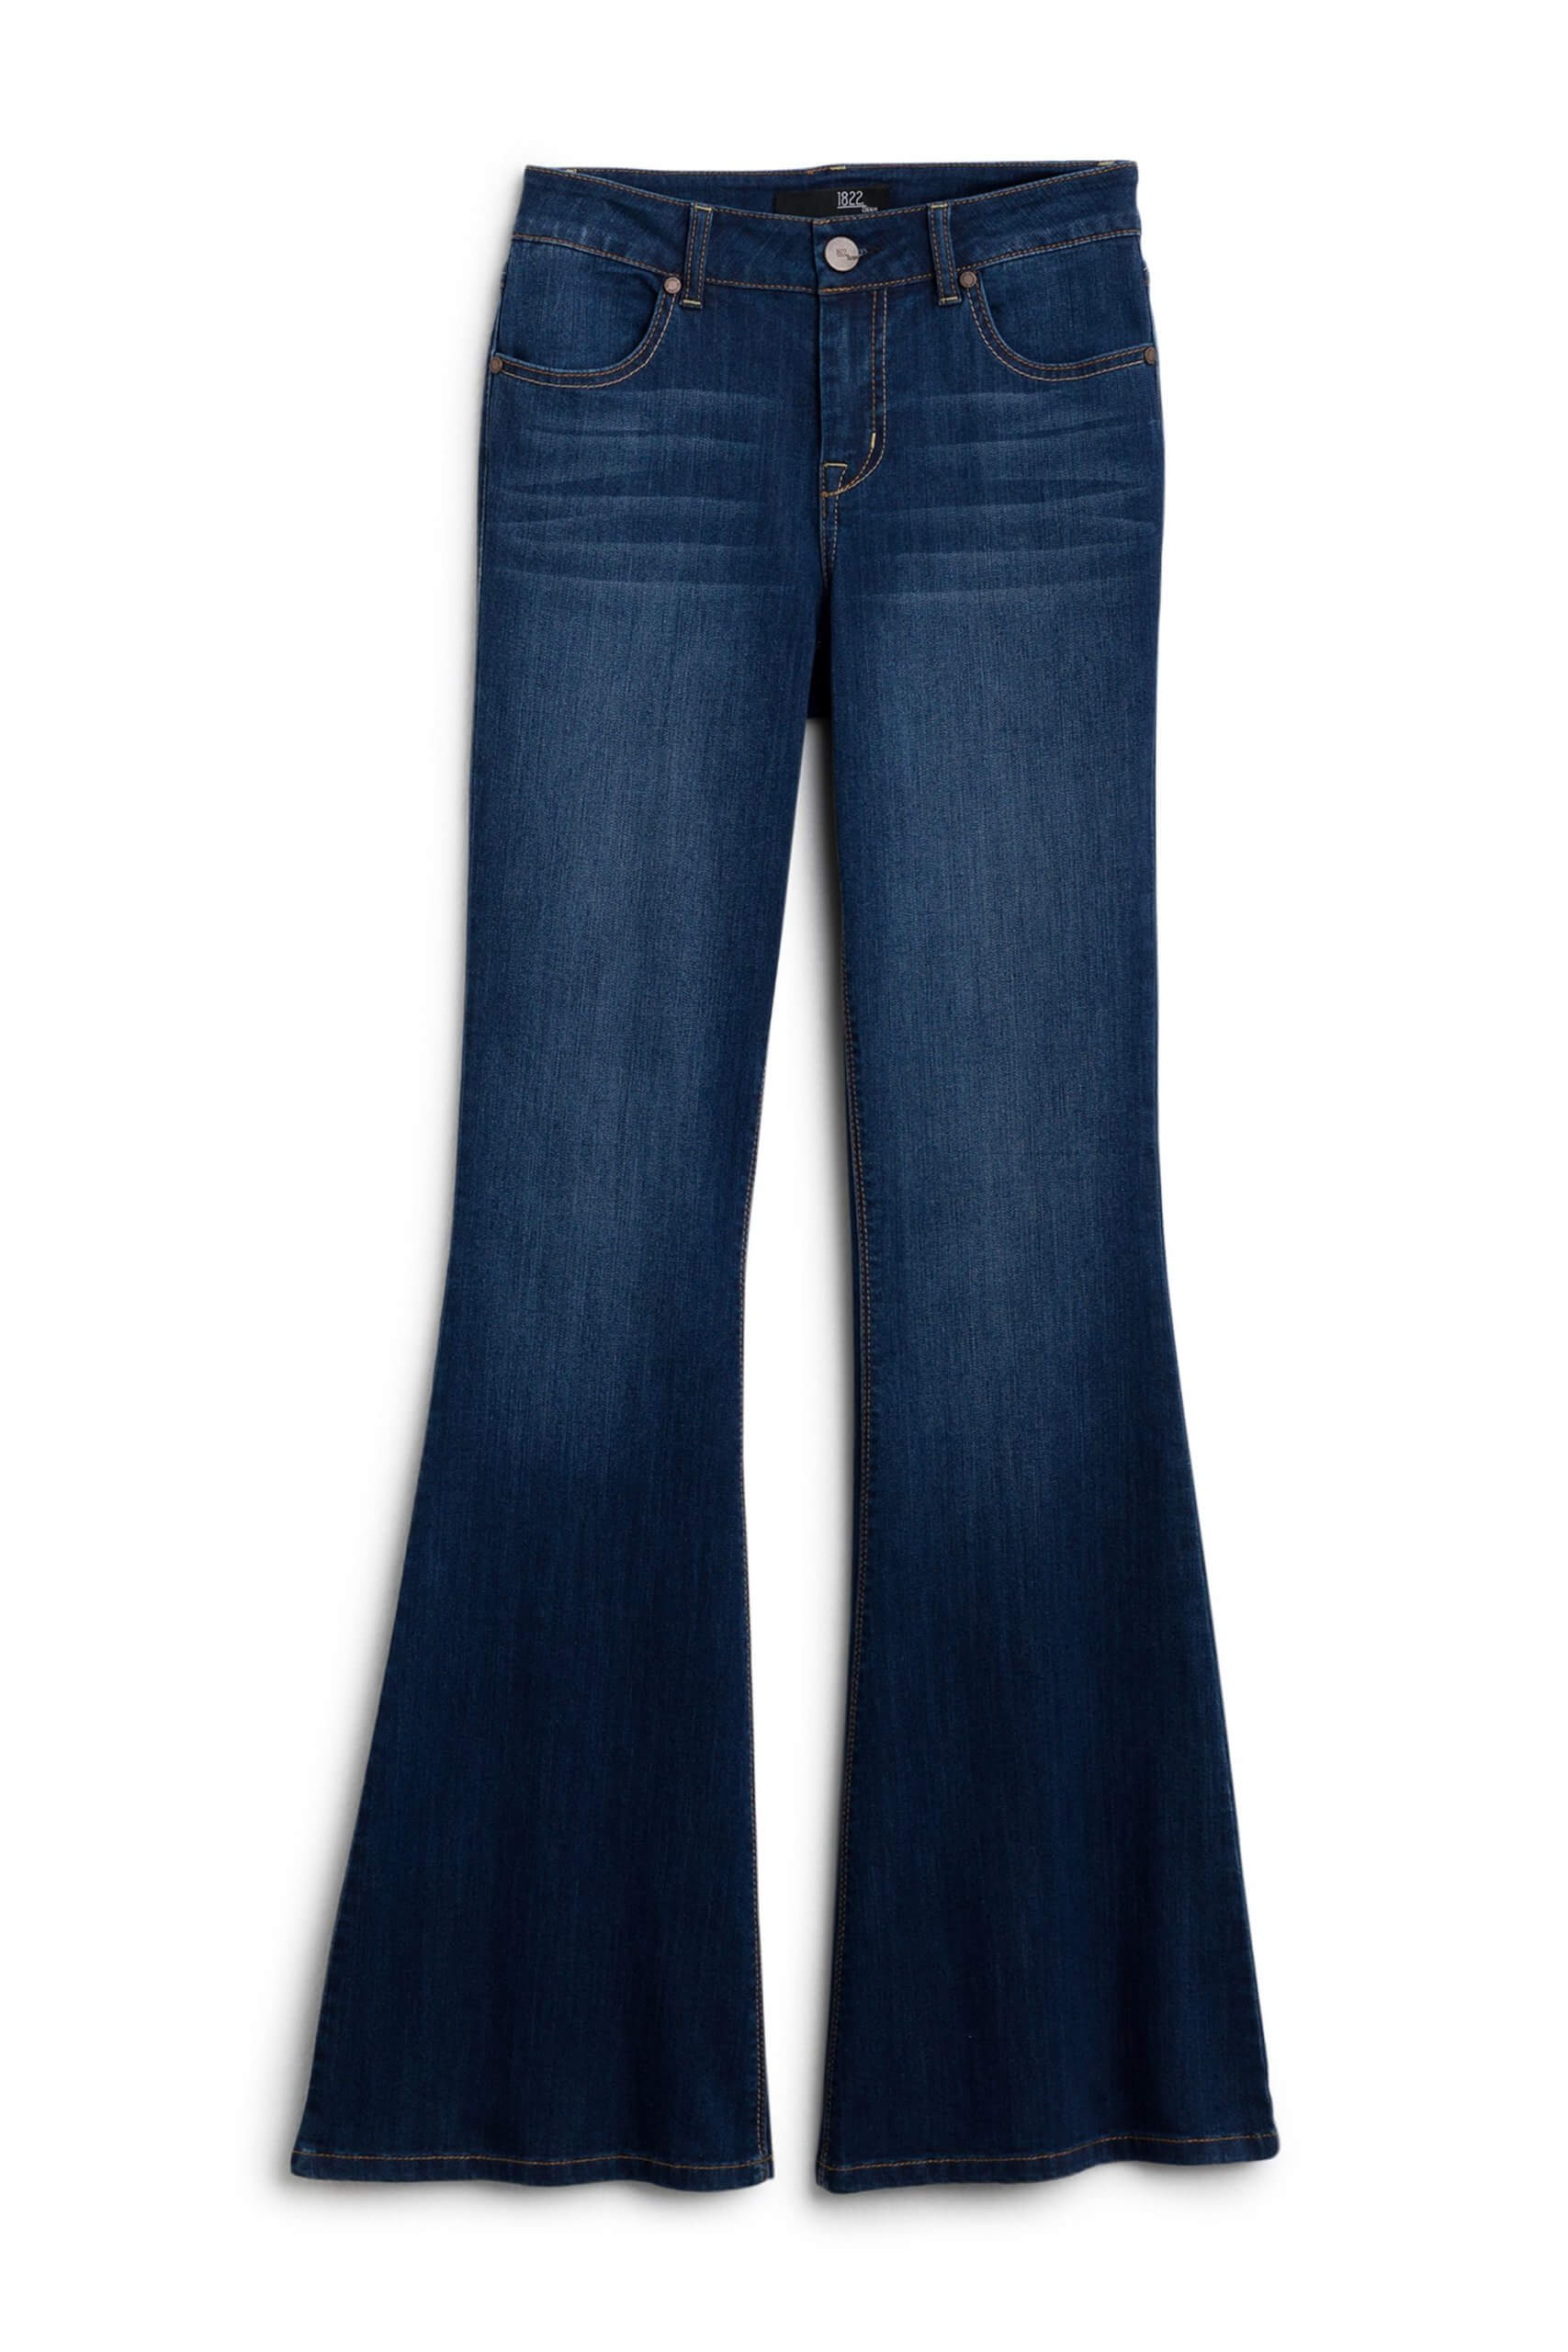 Are flare jeans still in style?